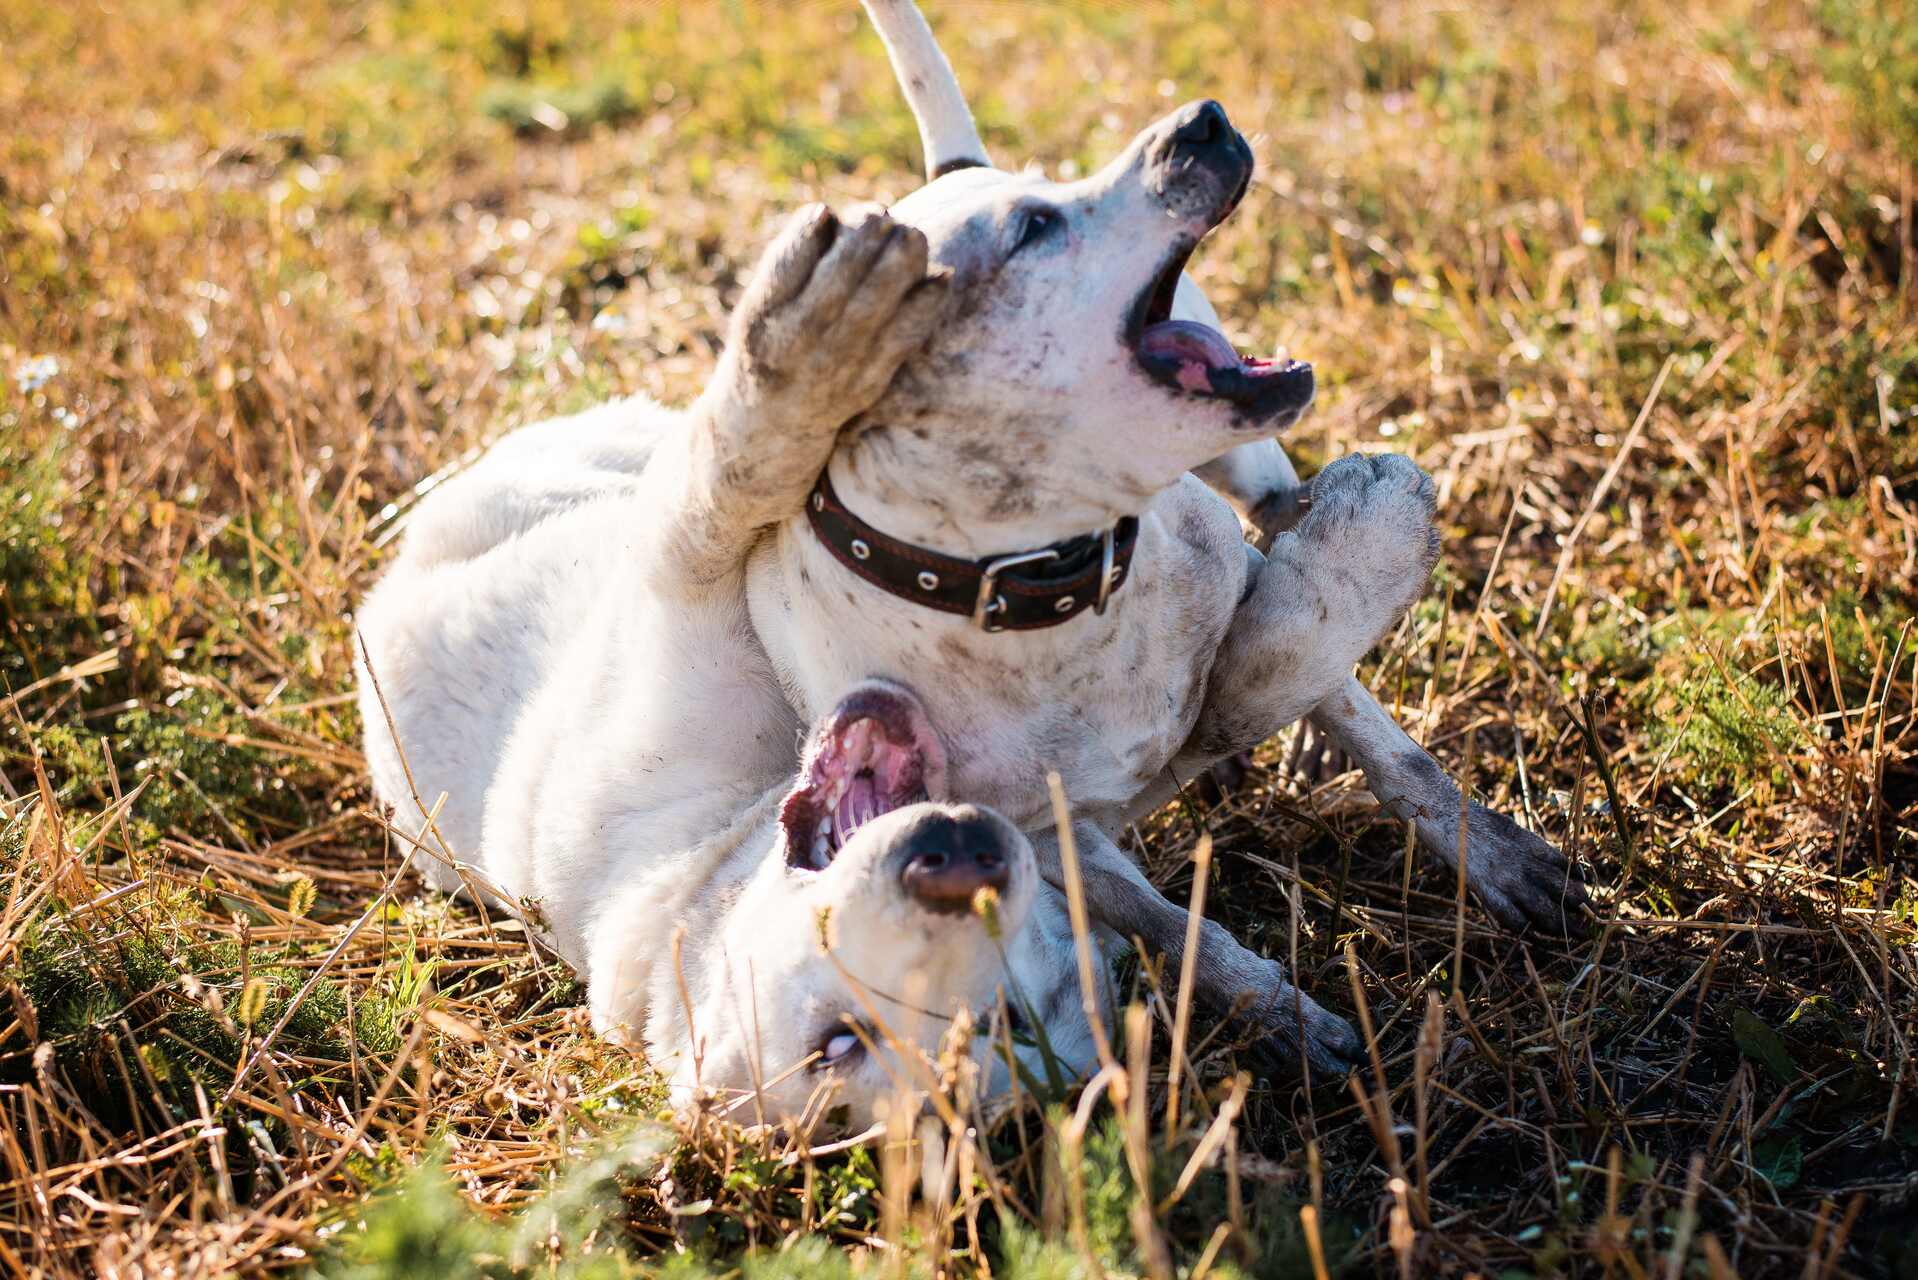 A pair of dogs playing in the grass